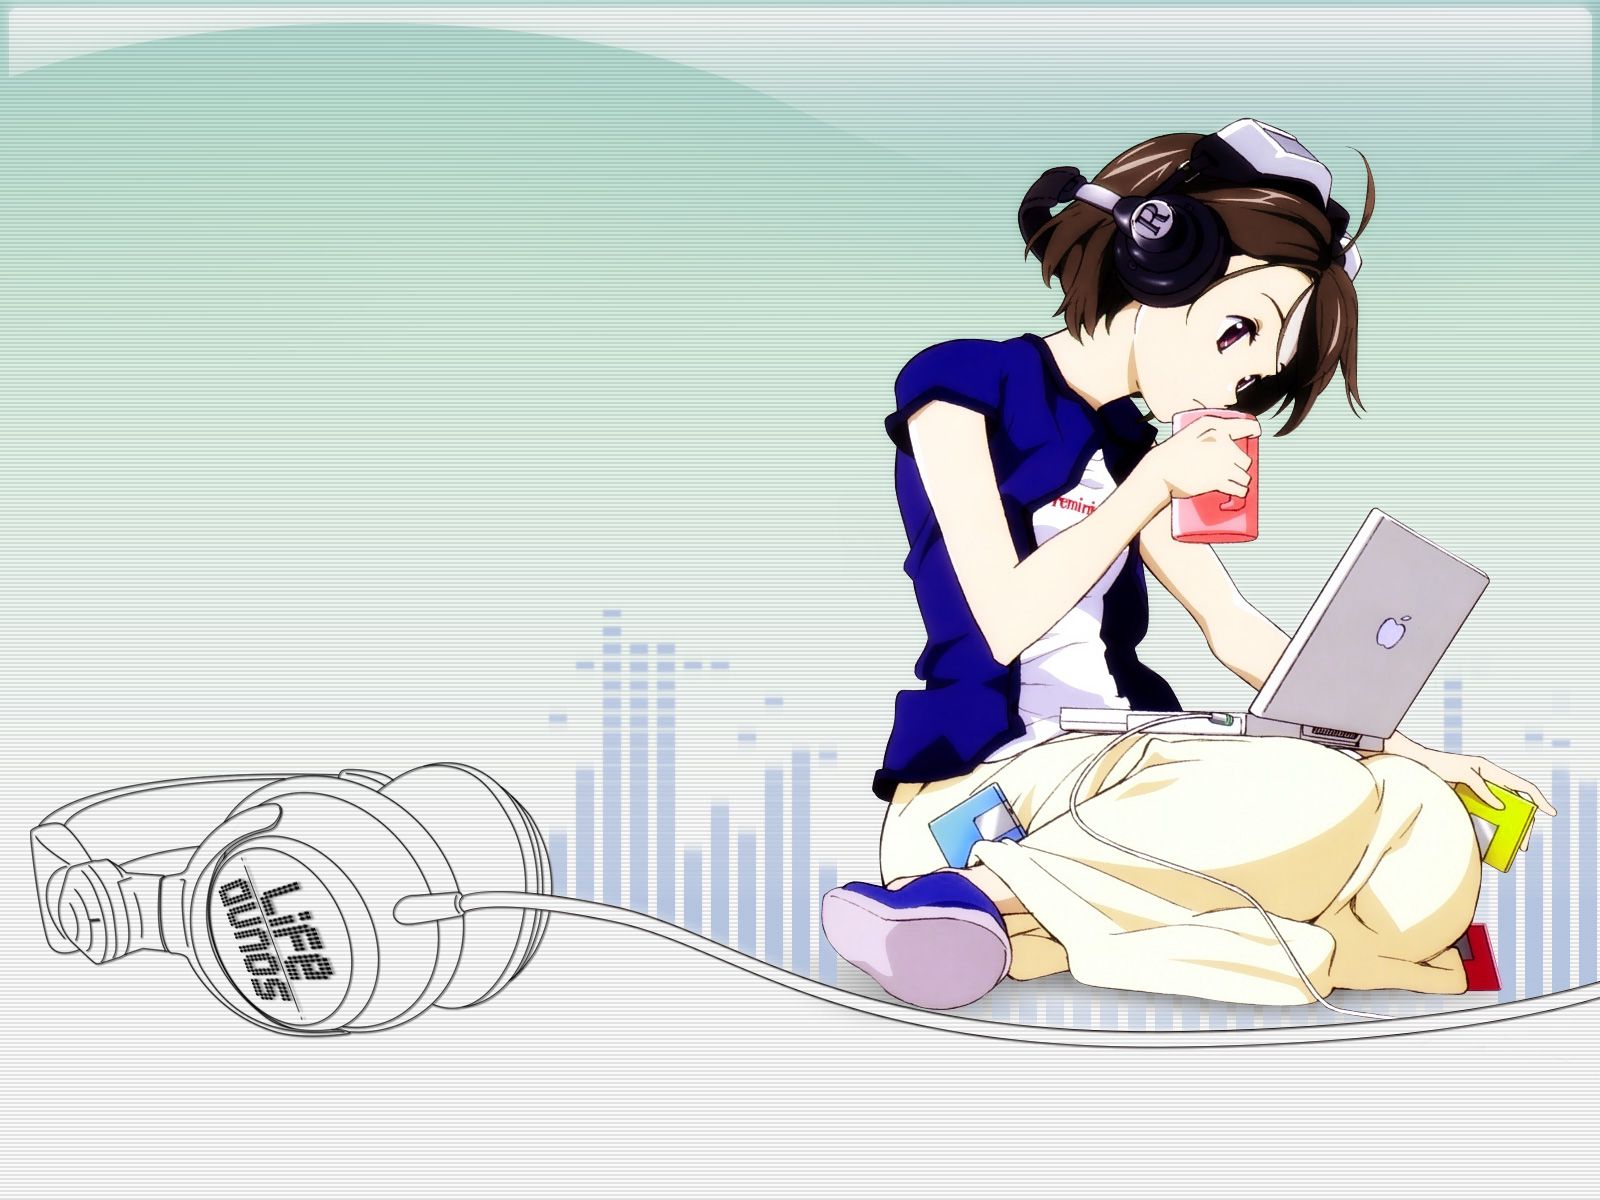 Drew trap picture or headphone girl えろあ. Vol.6 8